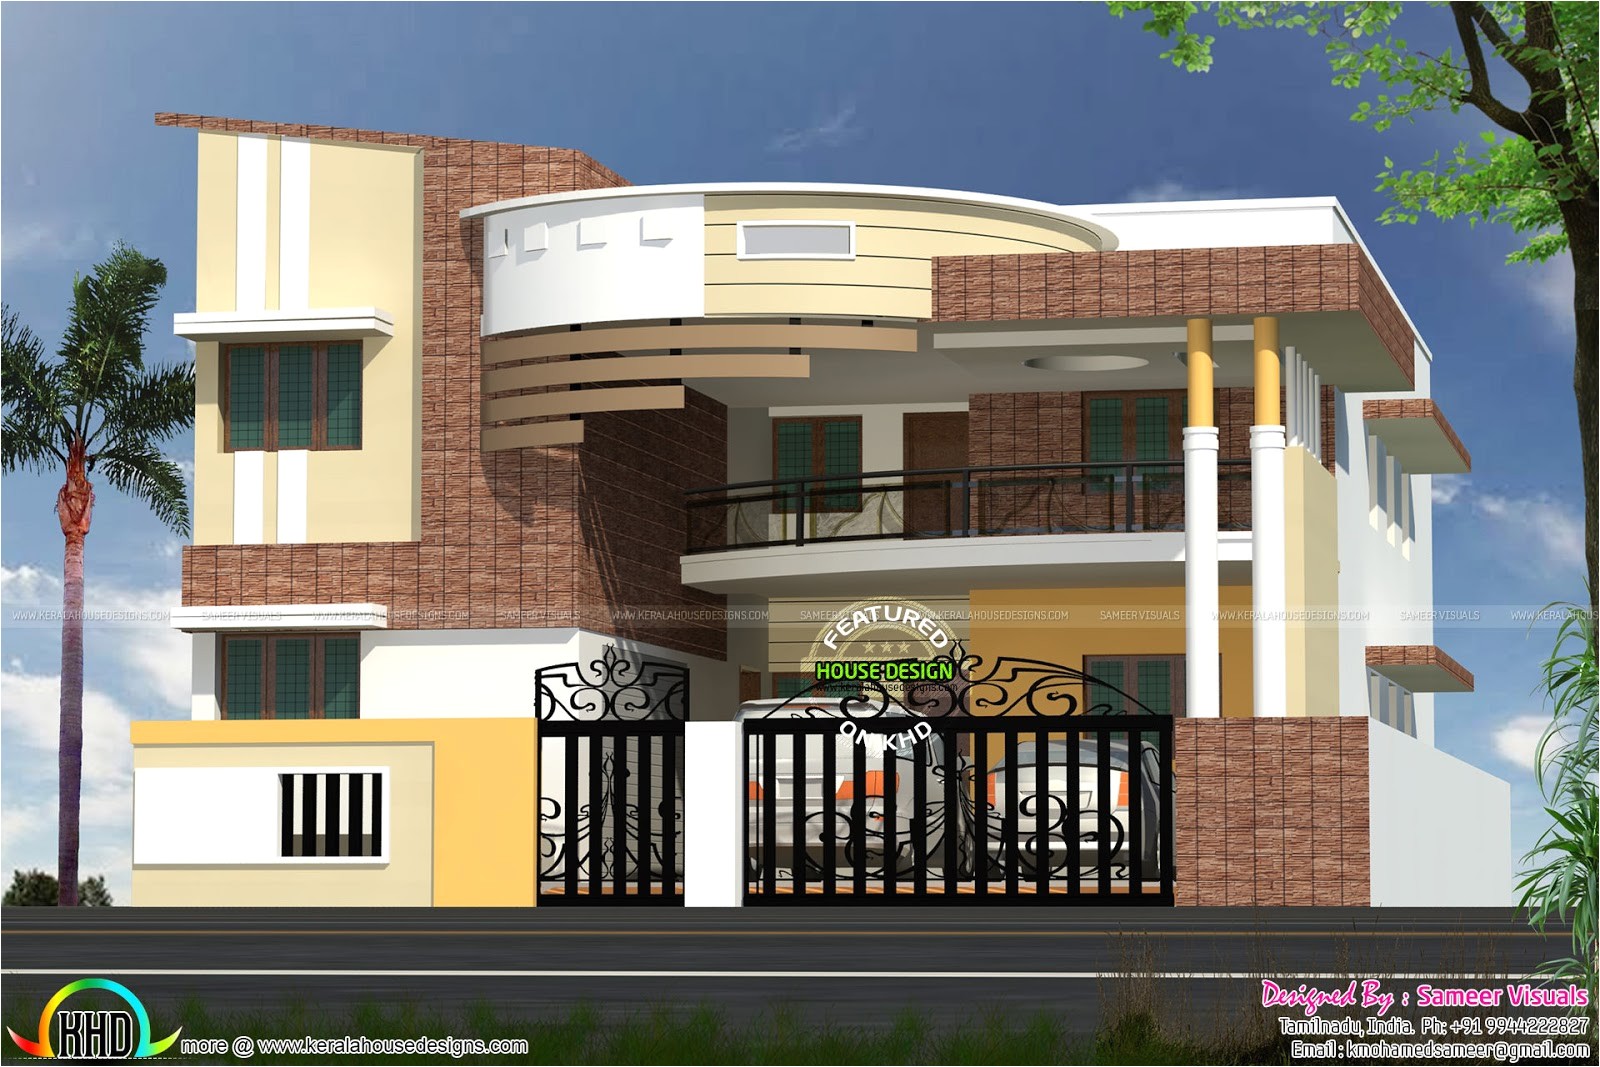 South Indian Home Designs and Plans Modern Contemporary south Indian Home Design Kerala Home